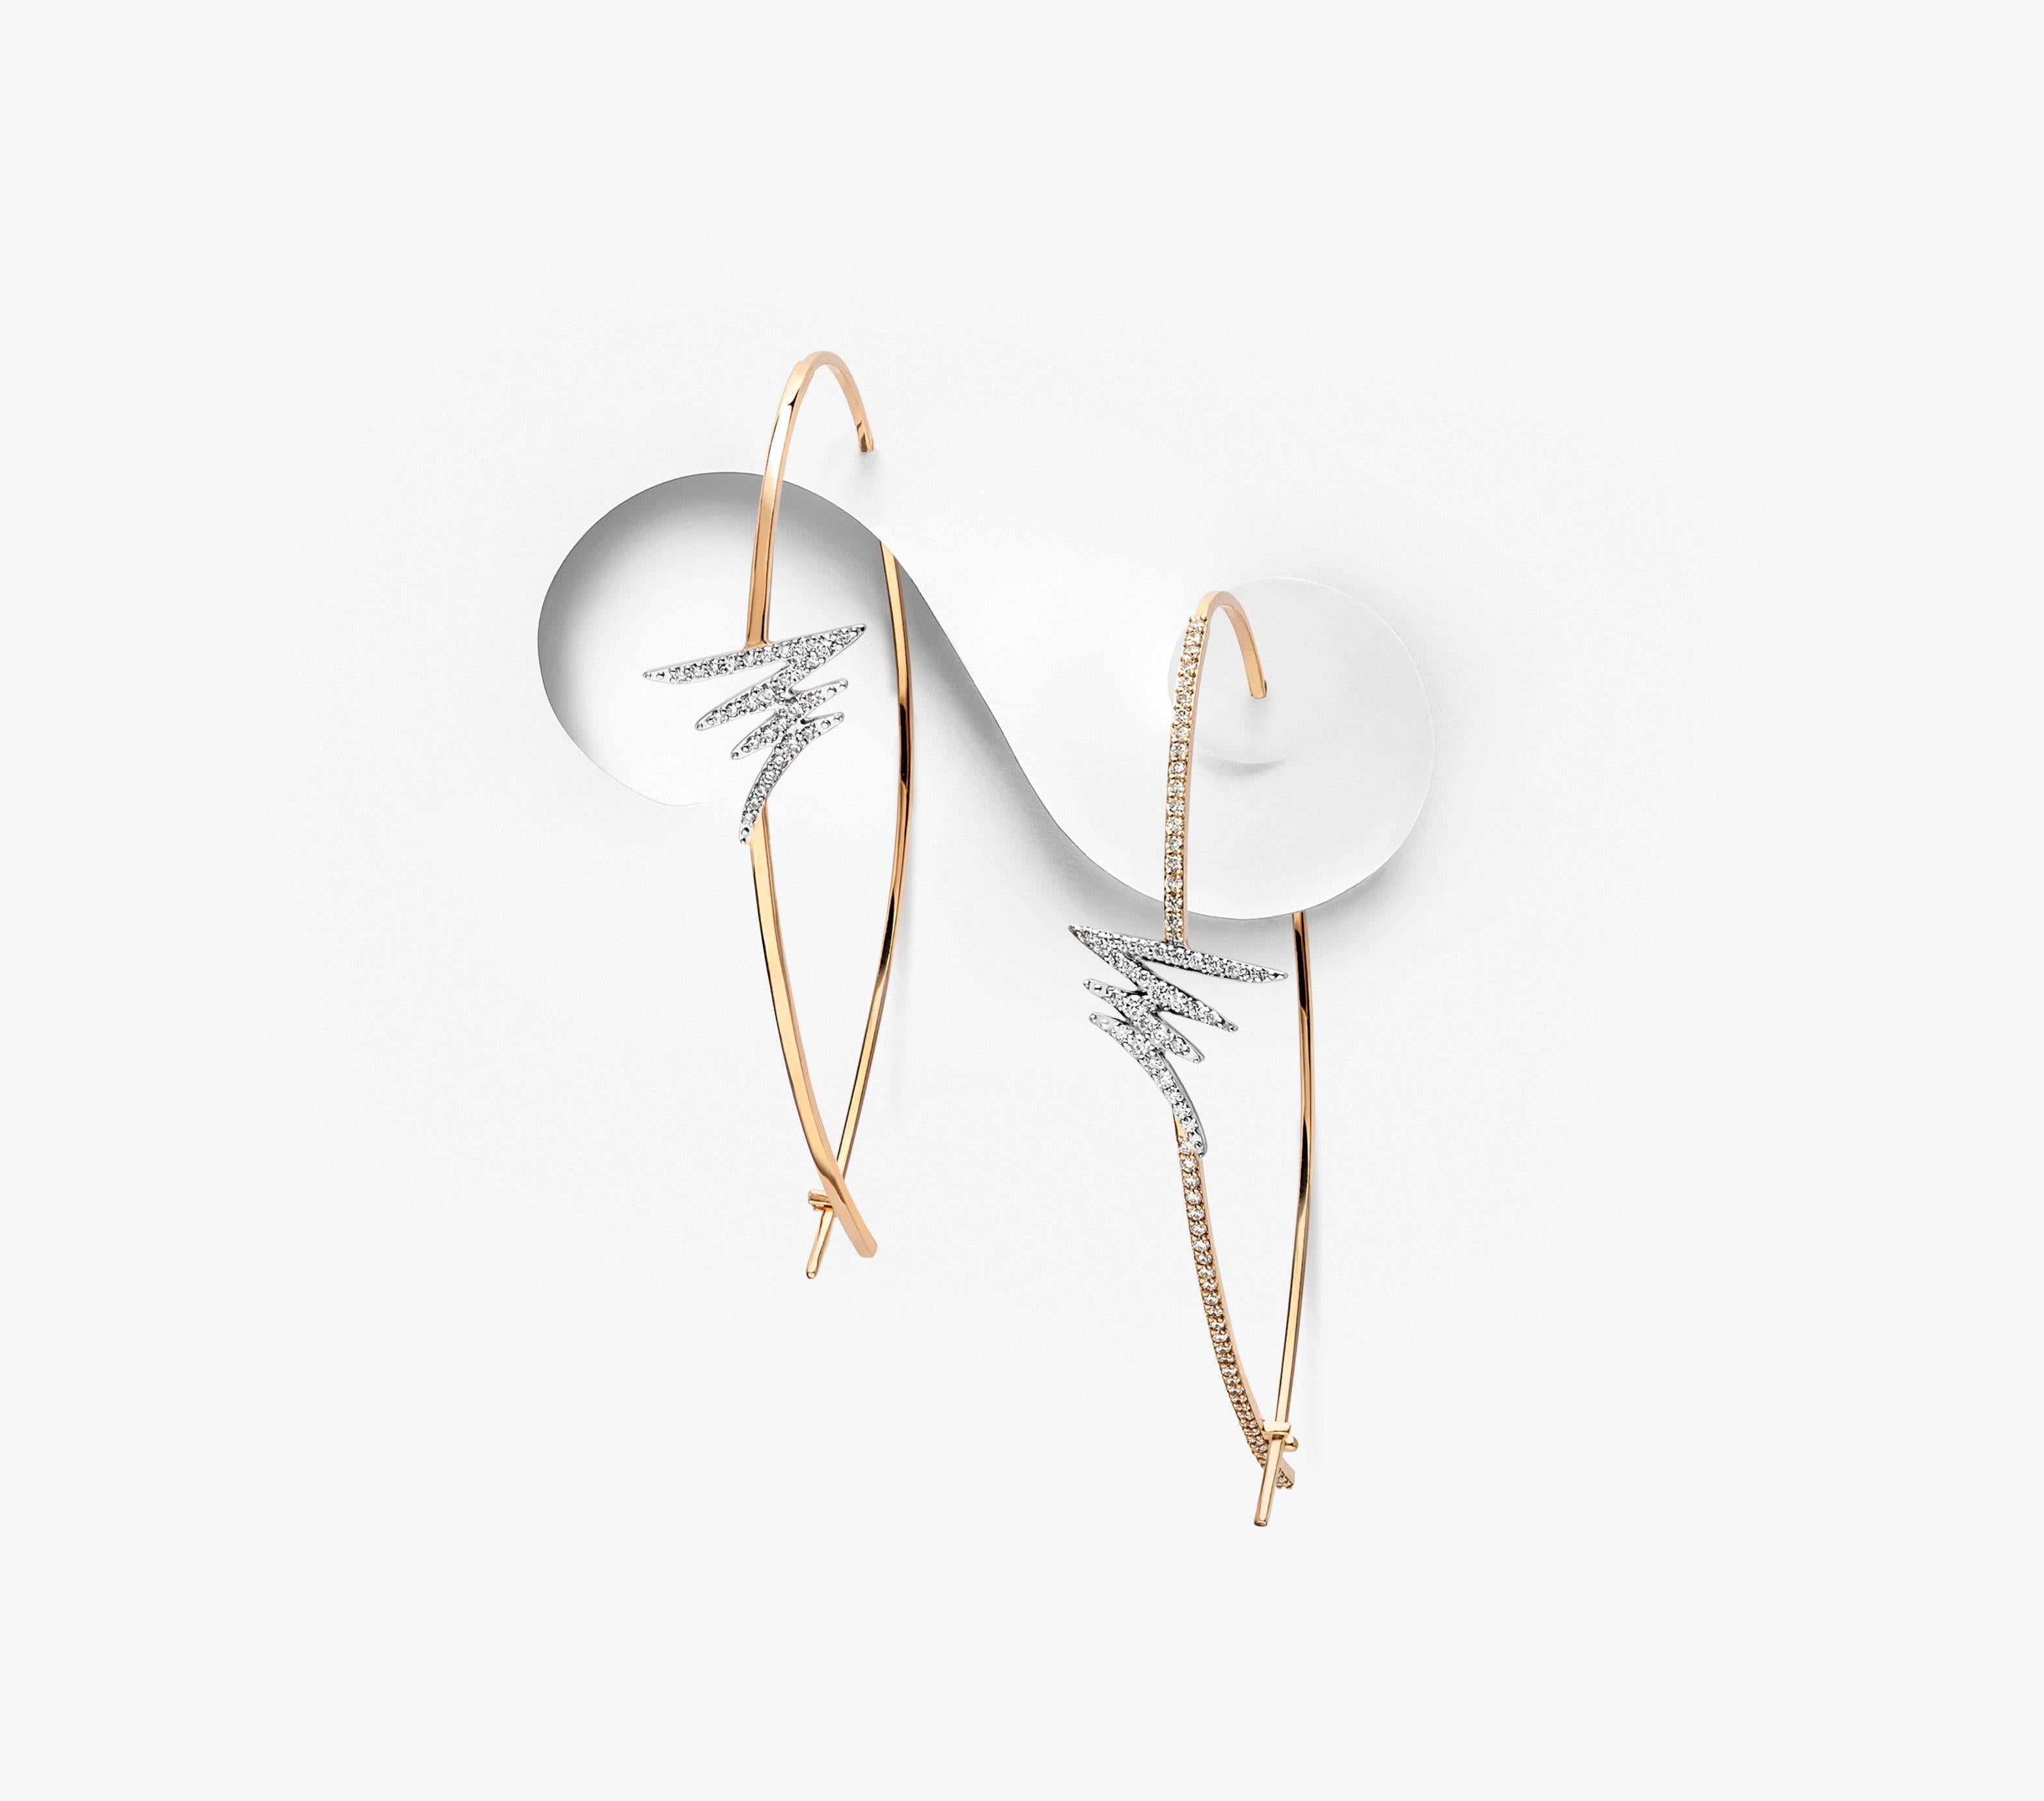 A collection that is effortless and elegant. This collection embodies the ideology of Alessa's brand mark, its edgy, minimal design and vibrant personality.

Product Name: Nexus Earrings
Diamonds: Colorless 0.30 cts 
Metal: 18K WhiteGold